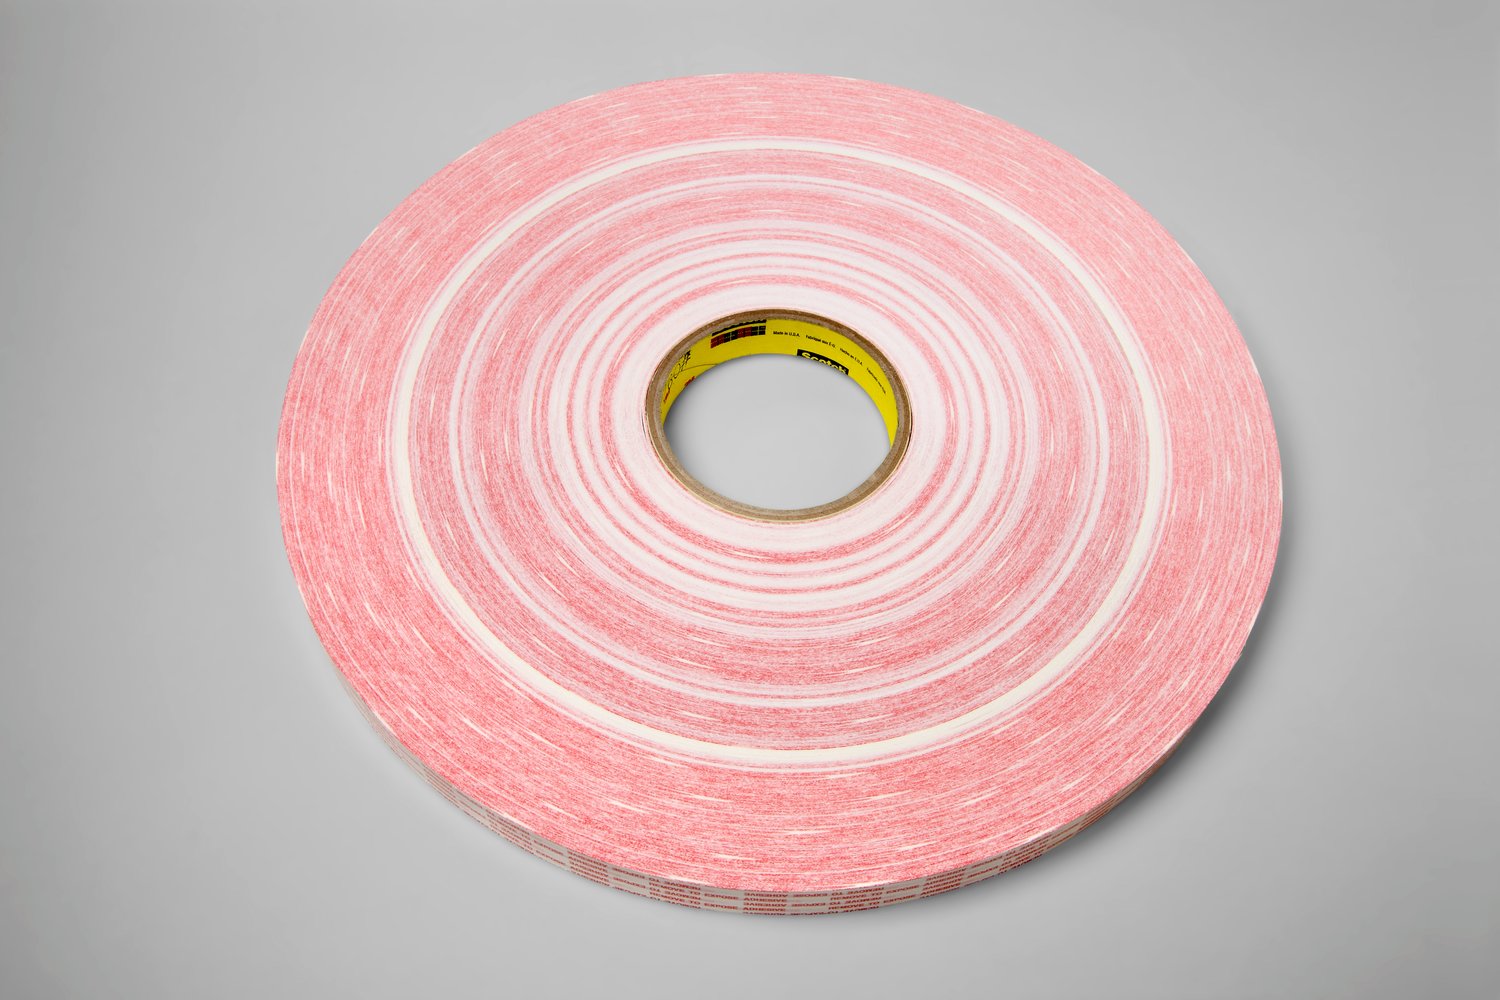 7000048384 - 3M Adhesive Transfer Tape Extended Liner 920XL, Translucent, 1 in x
1000 yd, 1 mil, 9 rolls per case